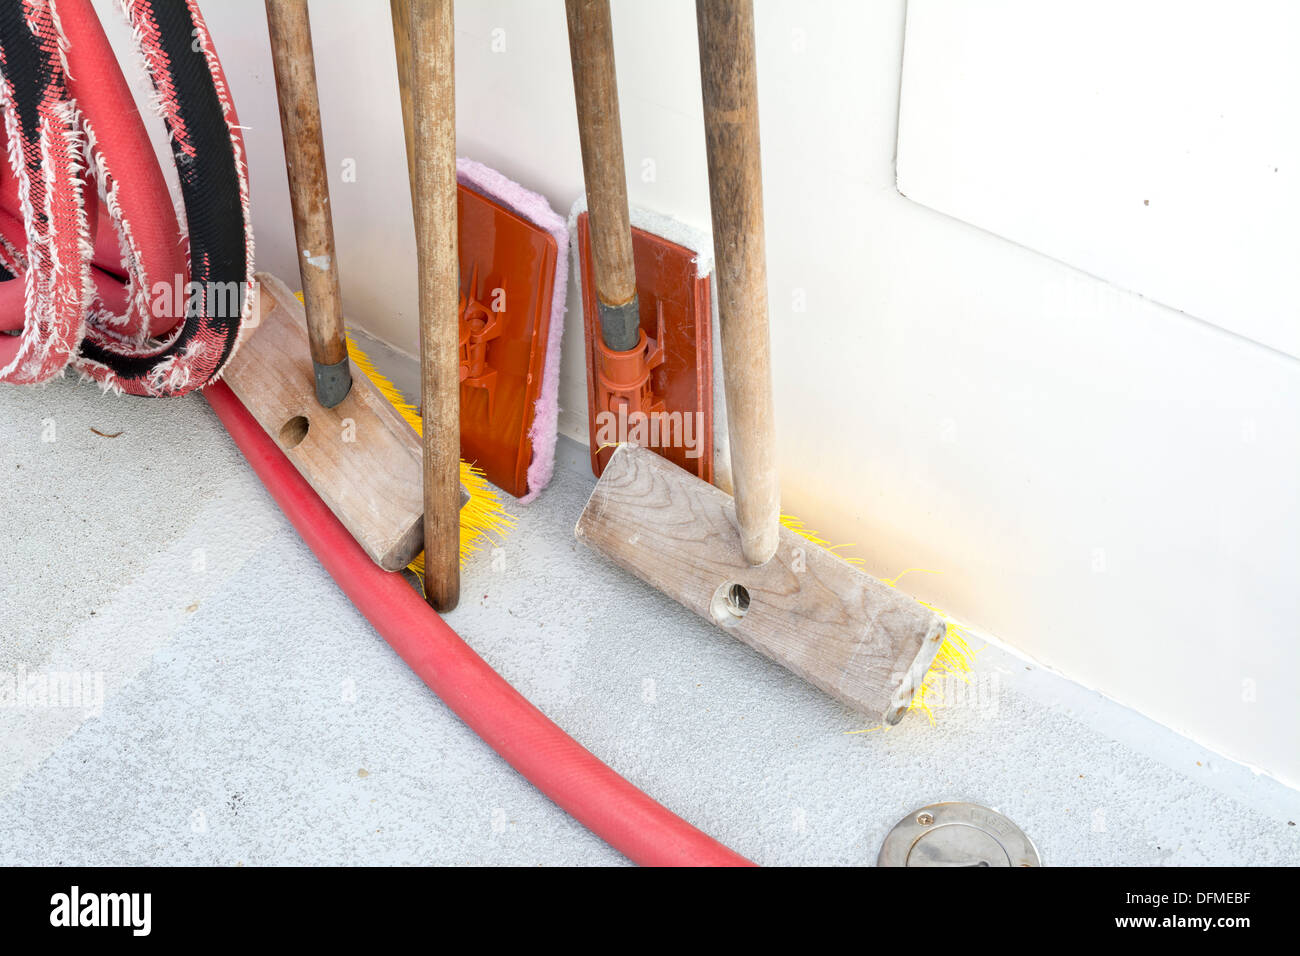 A set of boat deck cleaning and scrubbing supplies propped up against the hull Stock Photo